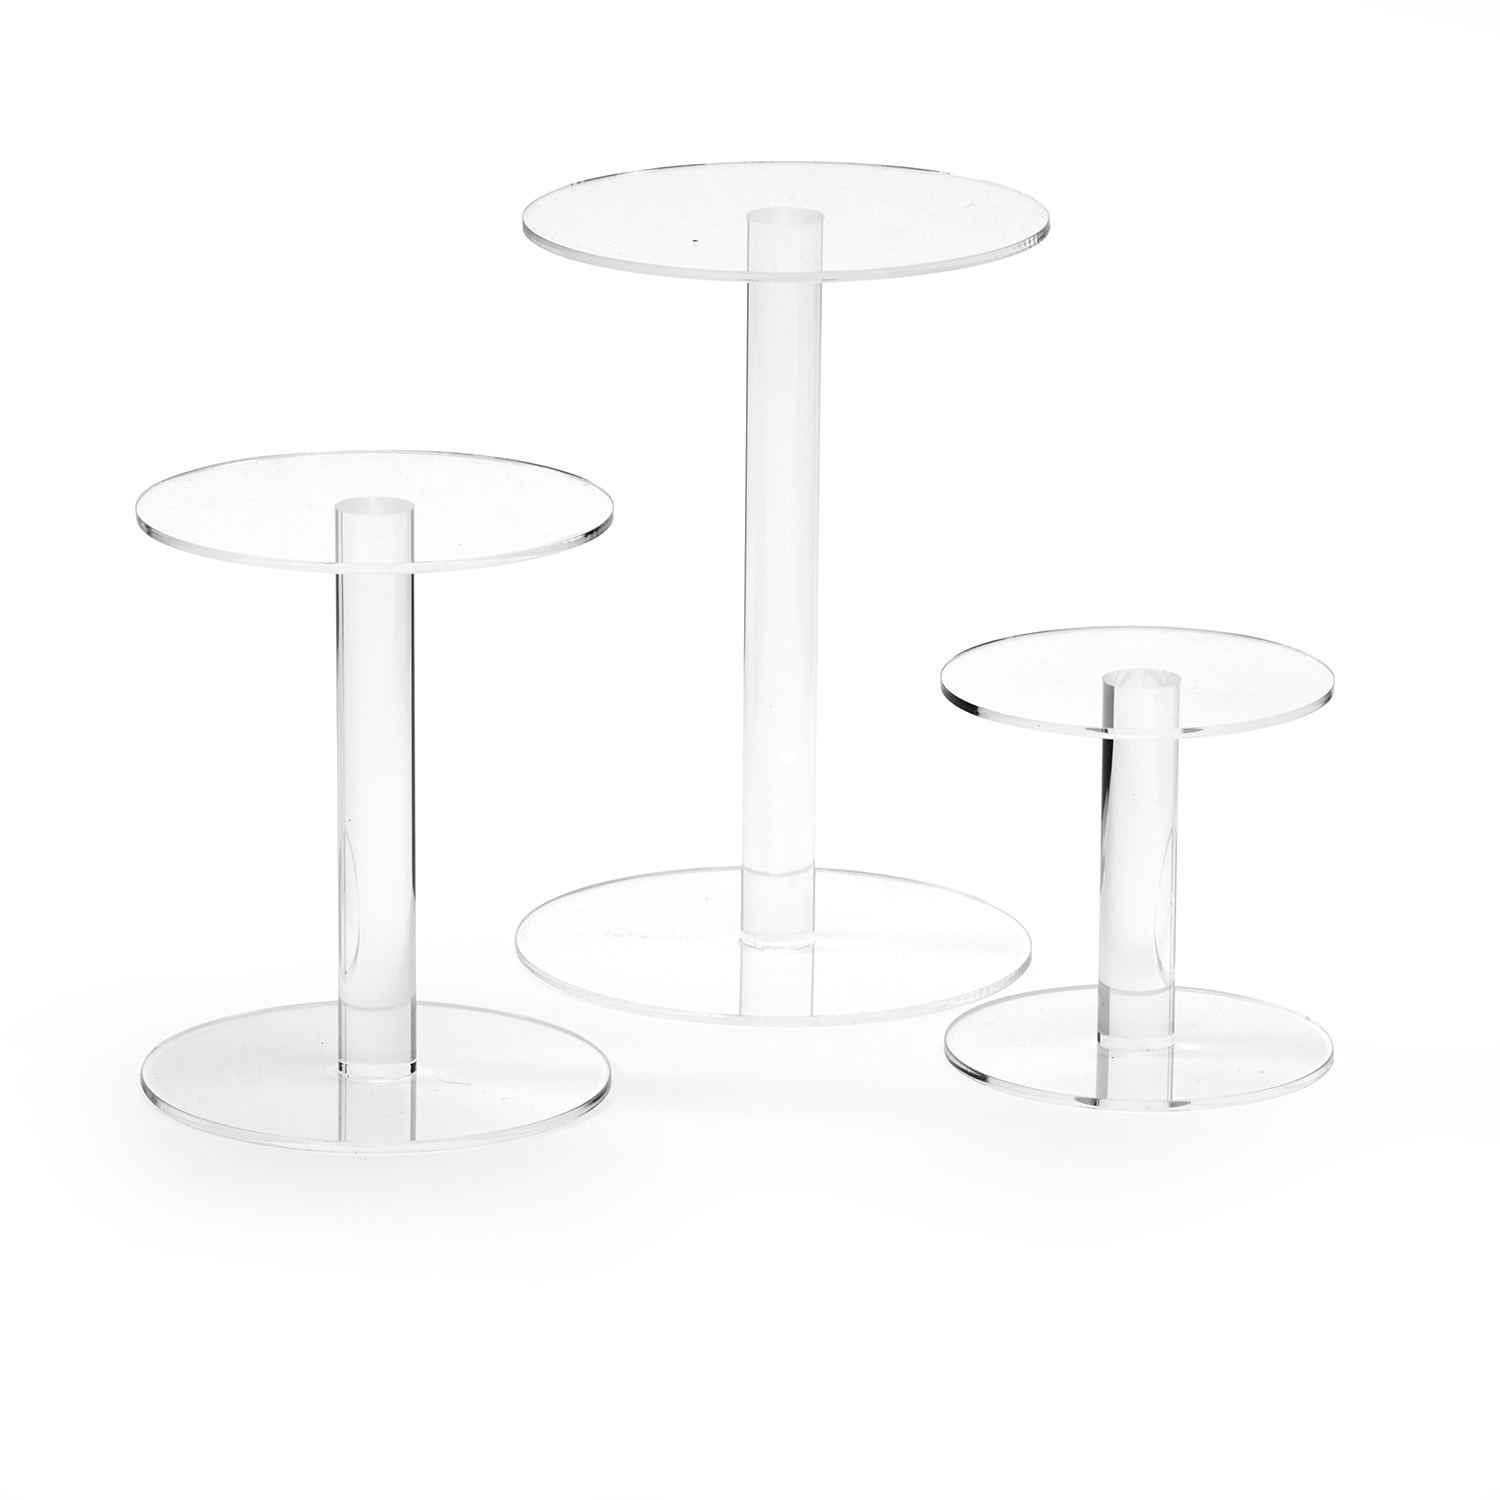 3 4 5 ADOROX Top Quality 1 Set of 3pcs Clear Acrylic Display Riser Jewelr for sale online 